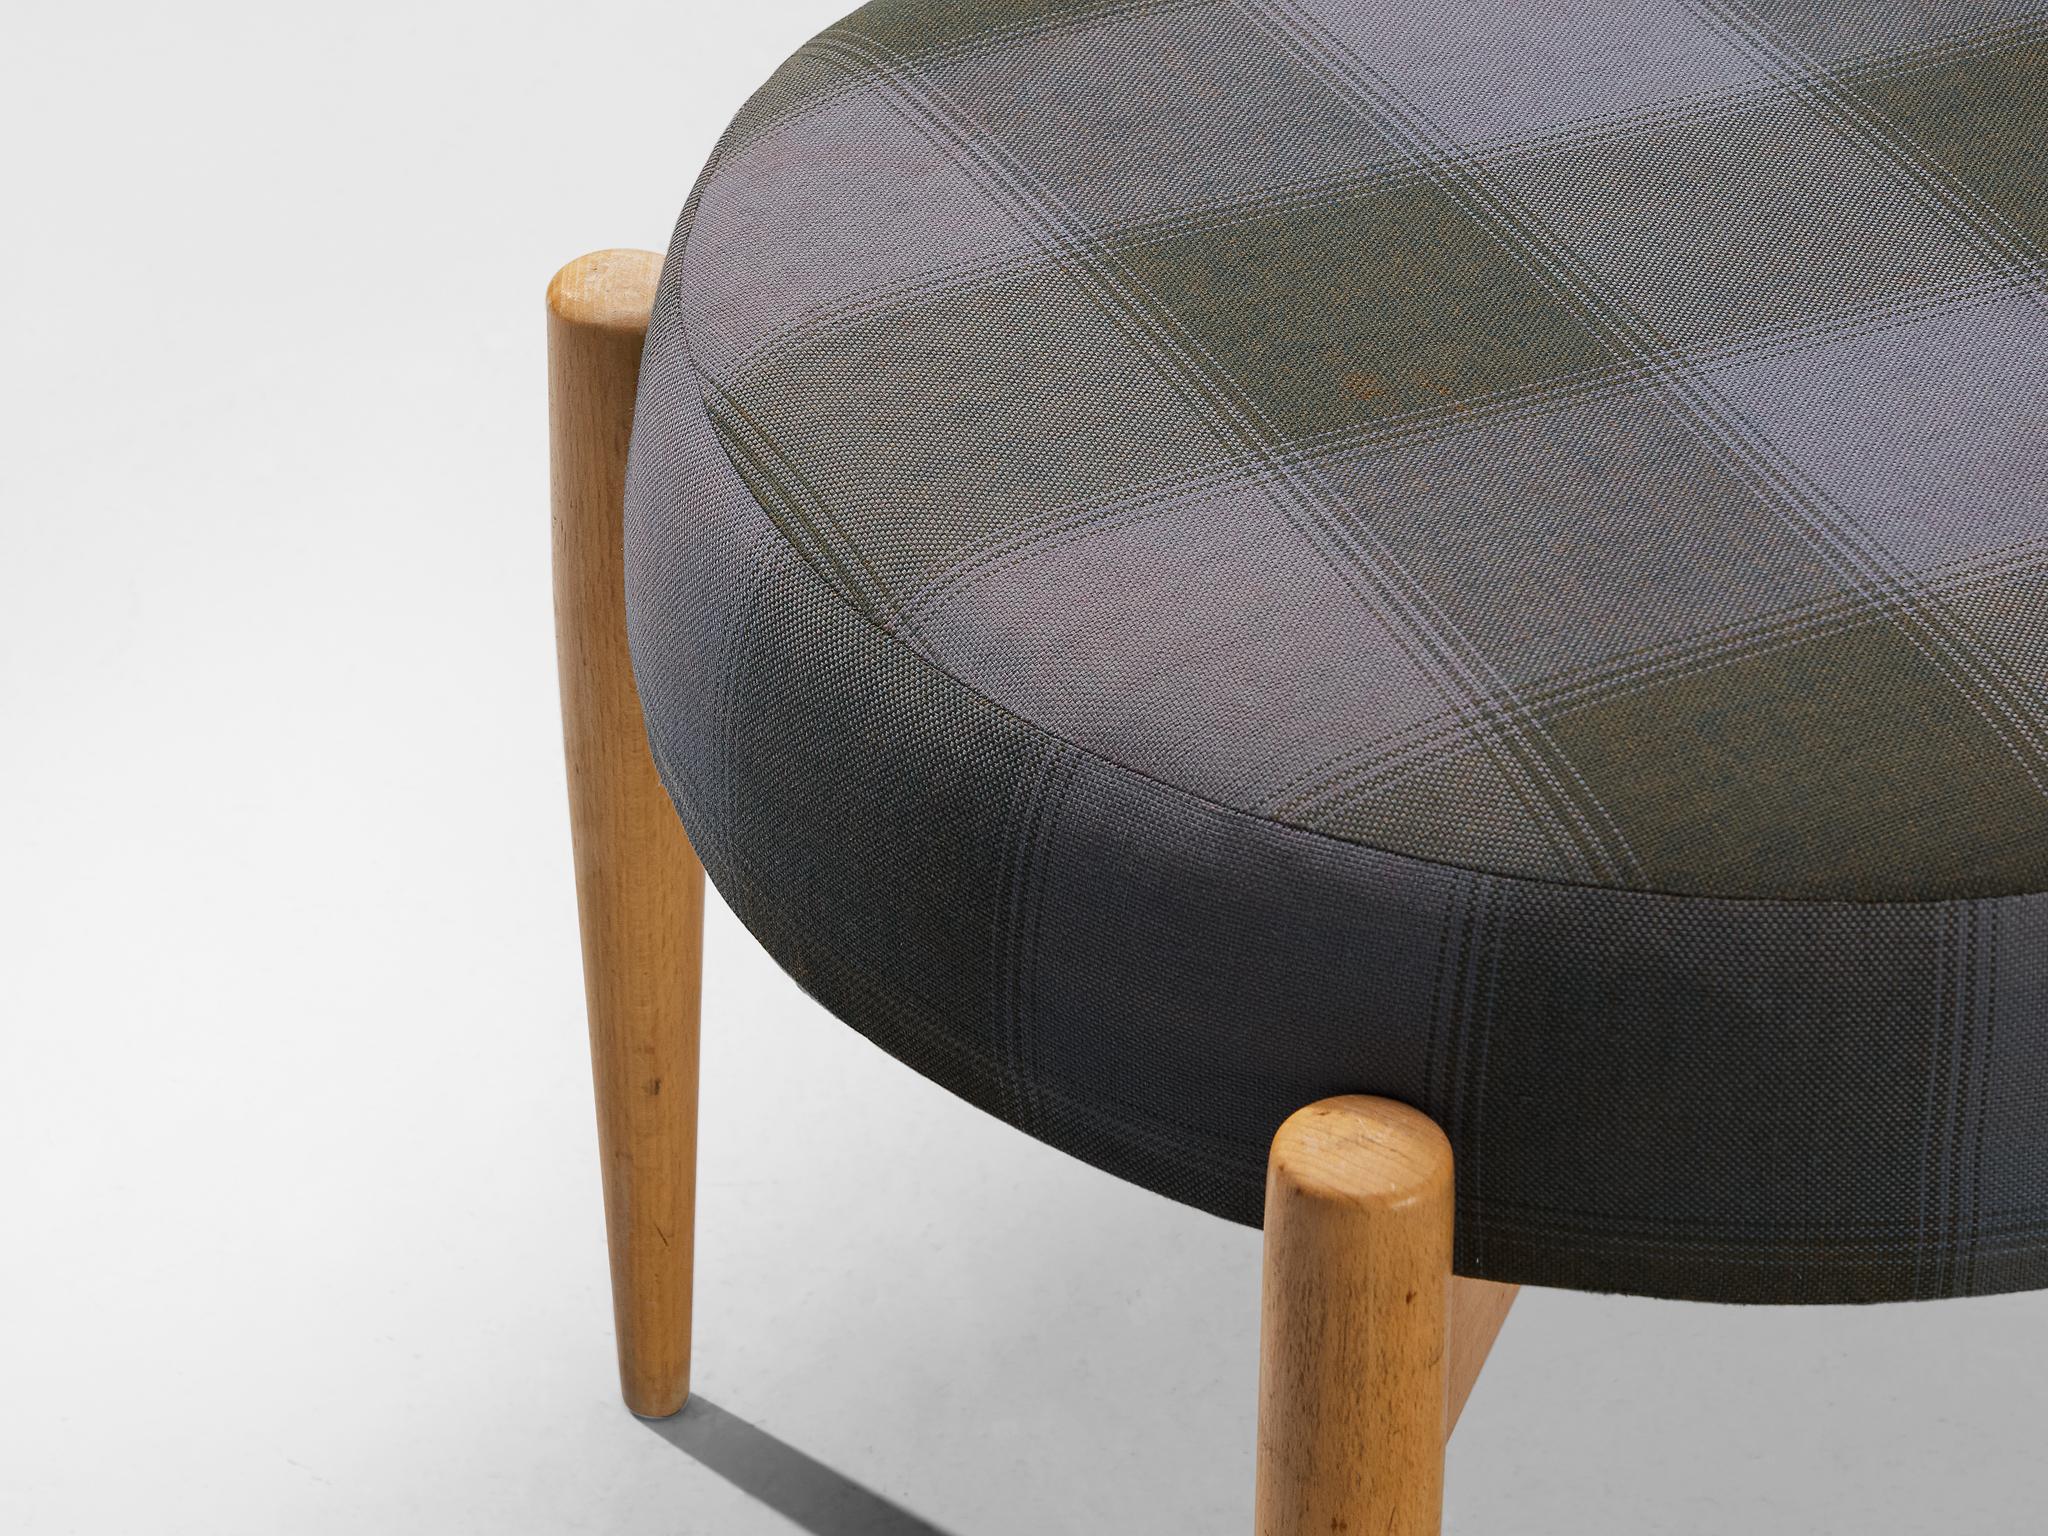 Danish Stool with Blond Wooden Frame and Checkered Upholstery